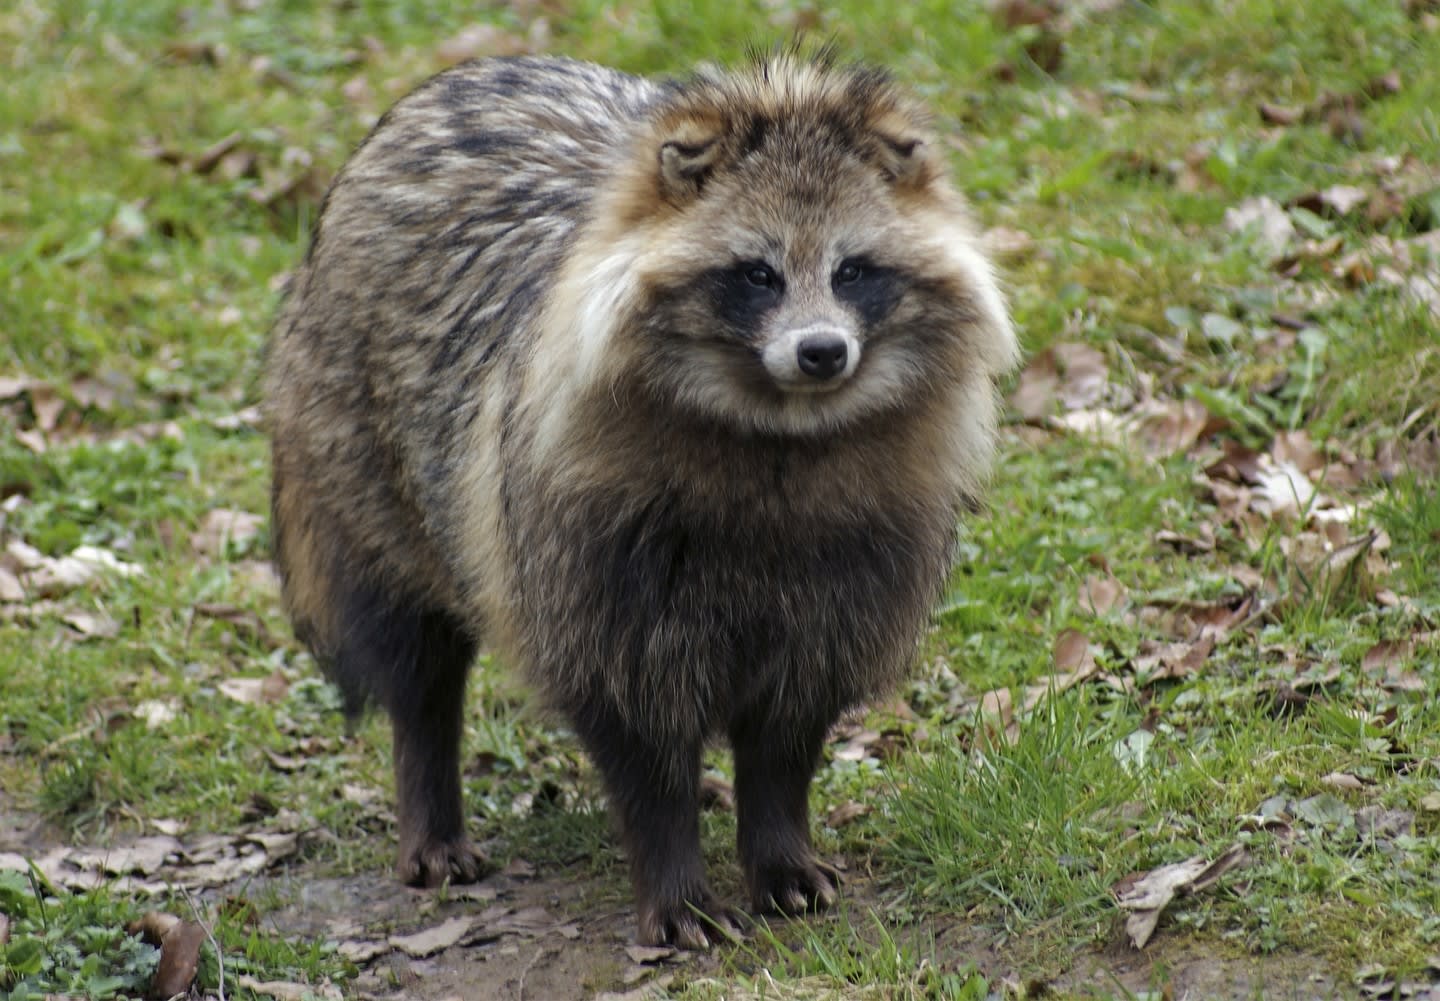 Tanuki (Raccoon Dog) they are not related to raccoons. Despite having that identical look, these east Asian dogs are most closely related to foxes. they have also been significant in Japanese folklore since ancient times. They are portrayed as mischievous and jolly and are famous for shape-shifting